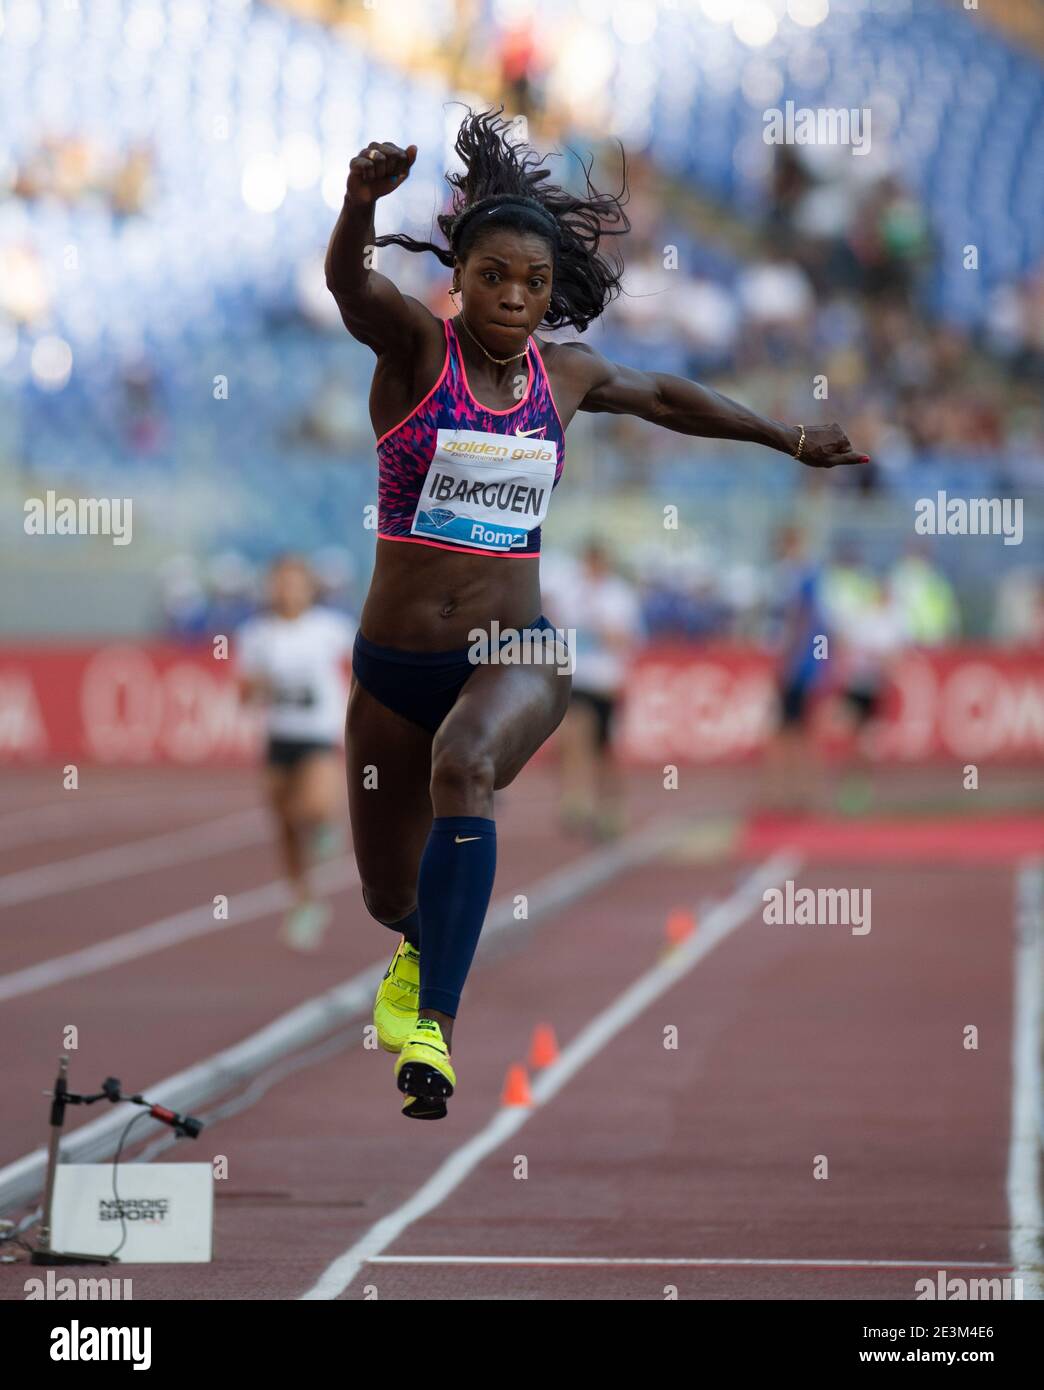 Catherine Ibarguen (Colombia) in action during IAAF Diamond League Golden Gala at the Stadio Olimpico in Rome. Stock Photo